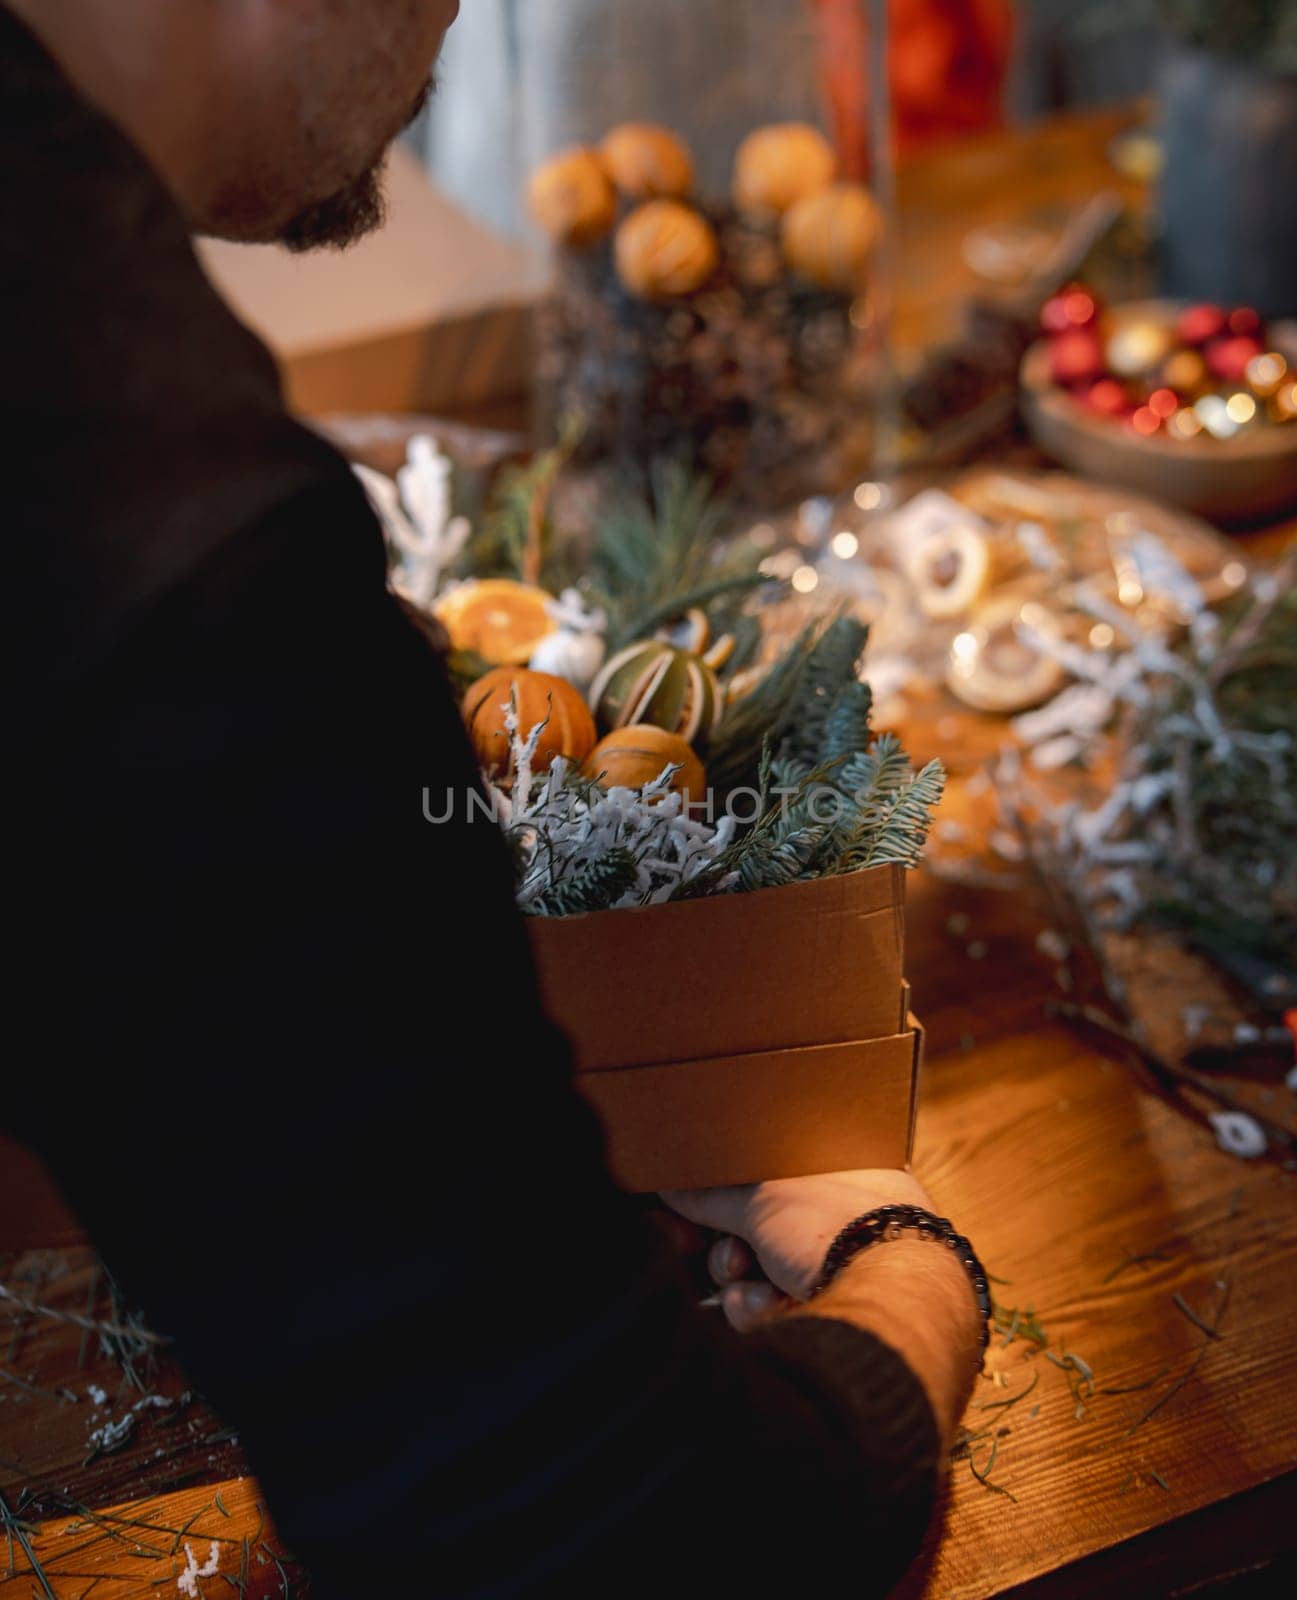 Workshop on crafting Christmas wreaths and New Year's decorations. by teksomolika